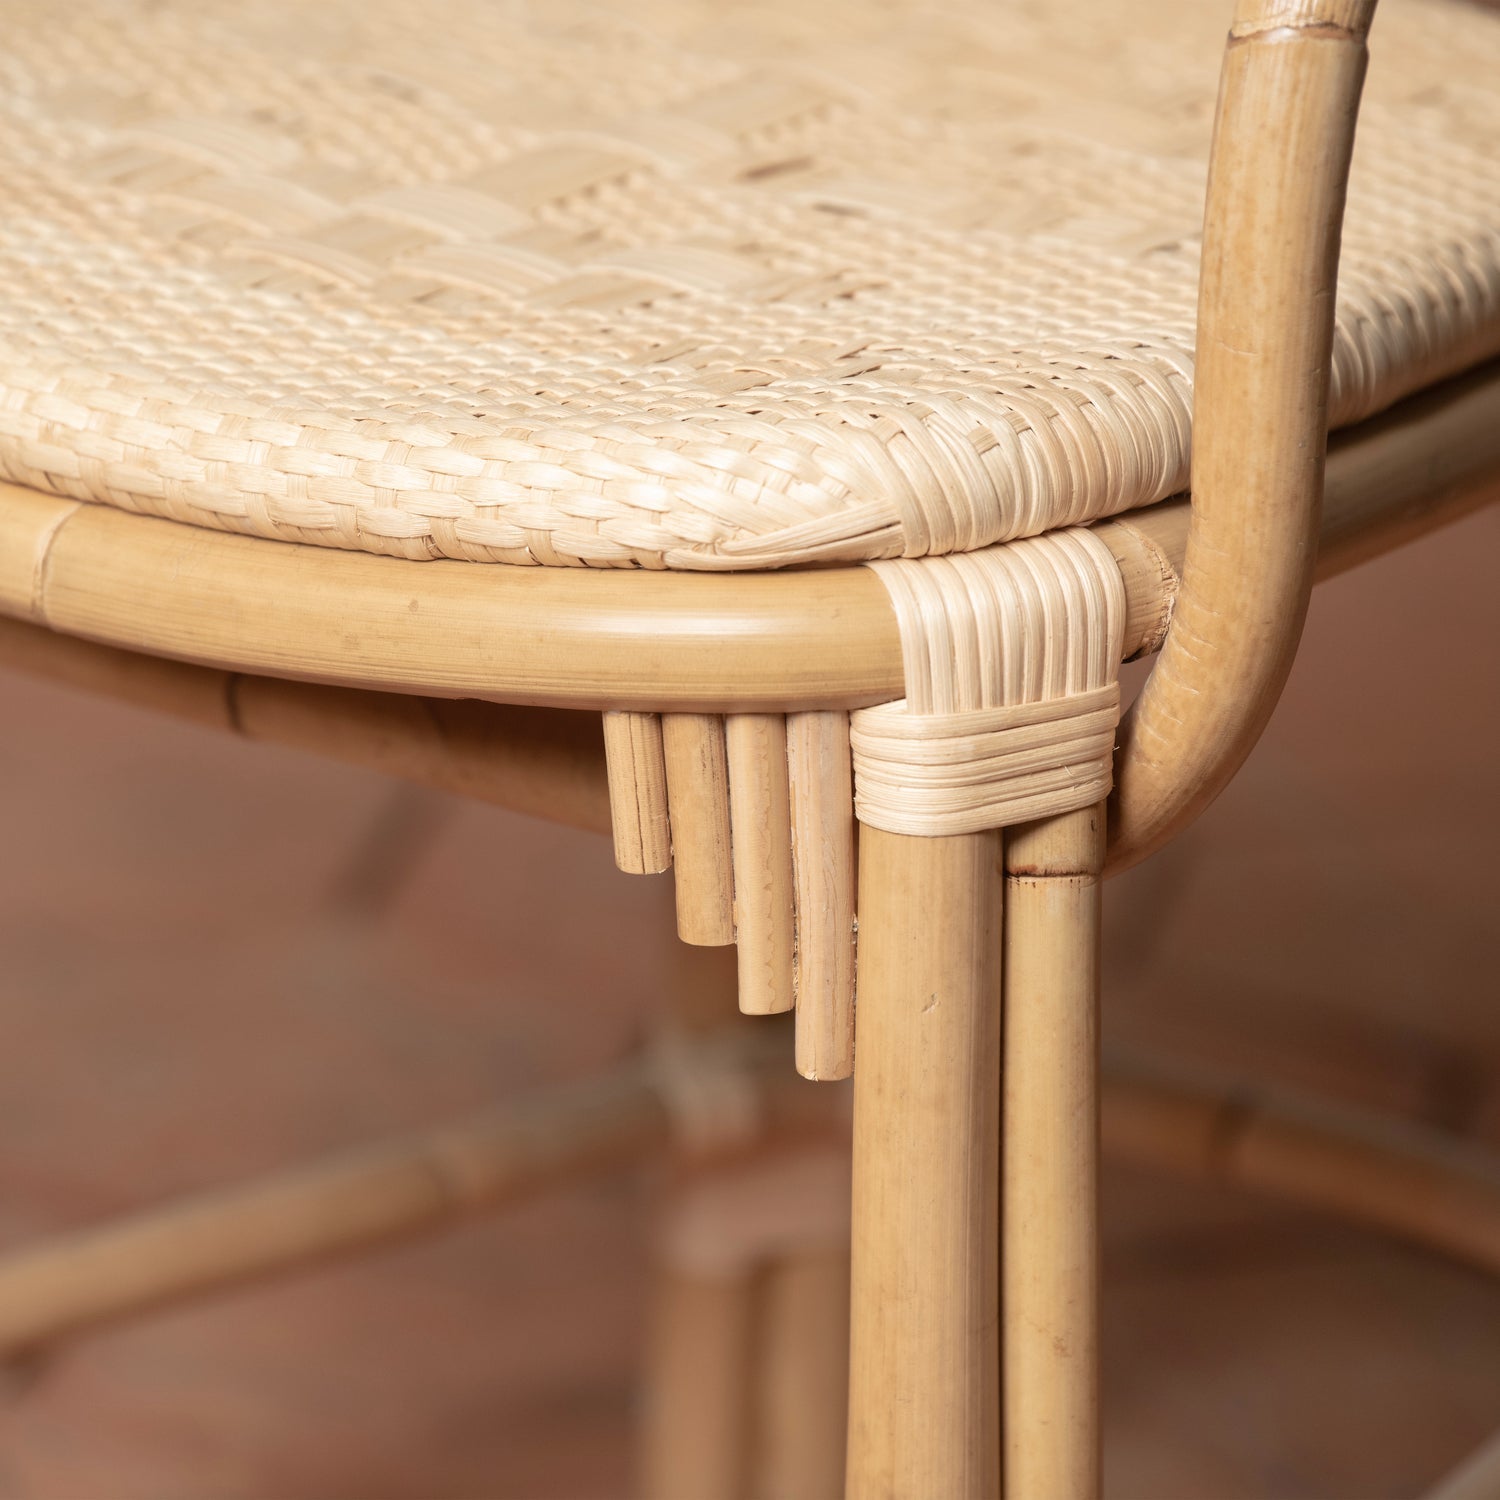 On an ivory background is a rattan chair with a woven rattan seat and backrest. This photo shows the details of the cane detailing. 